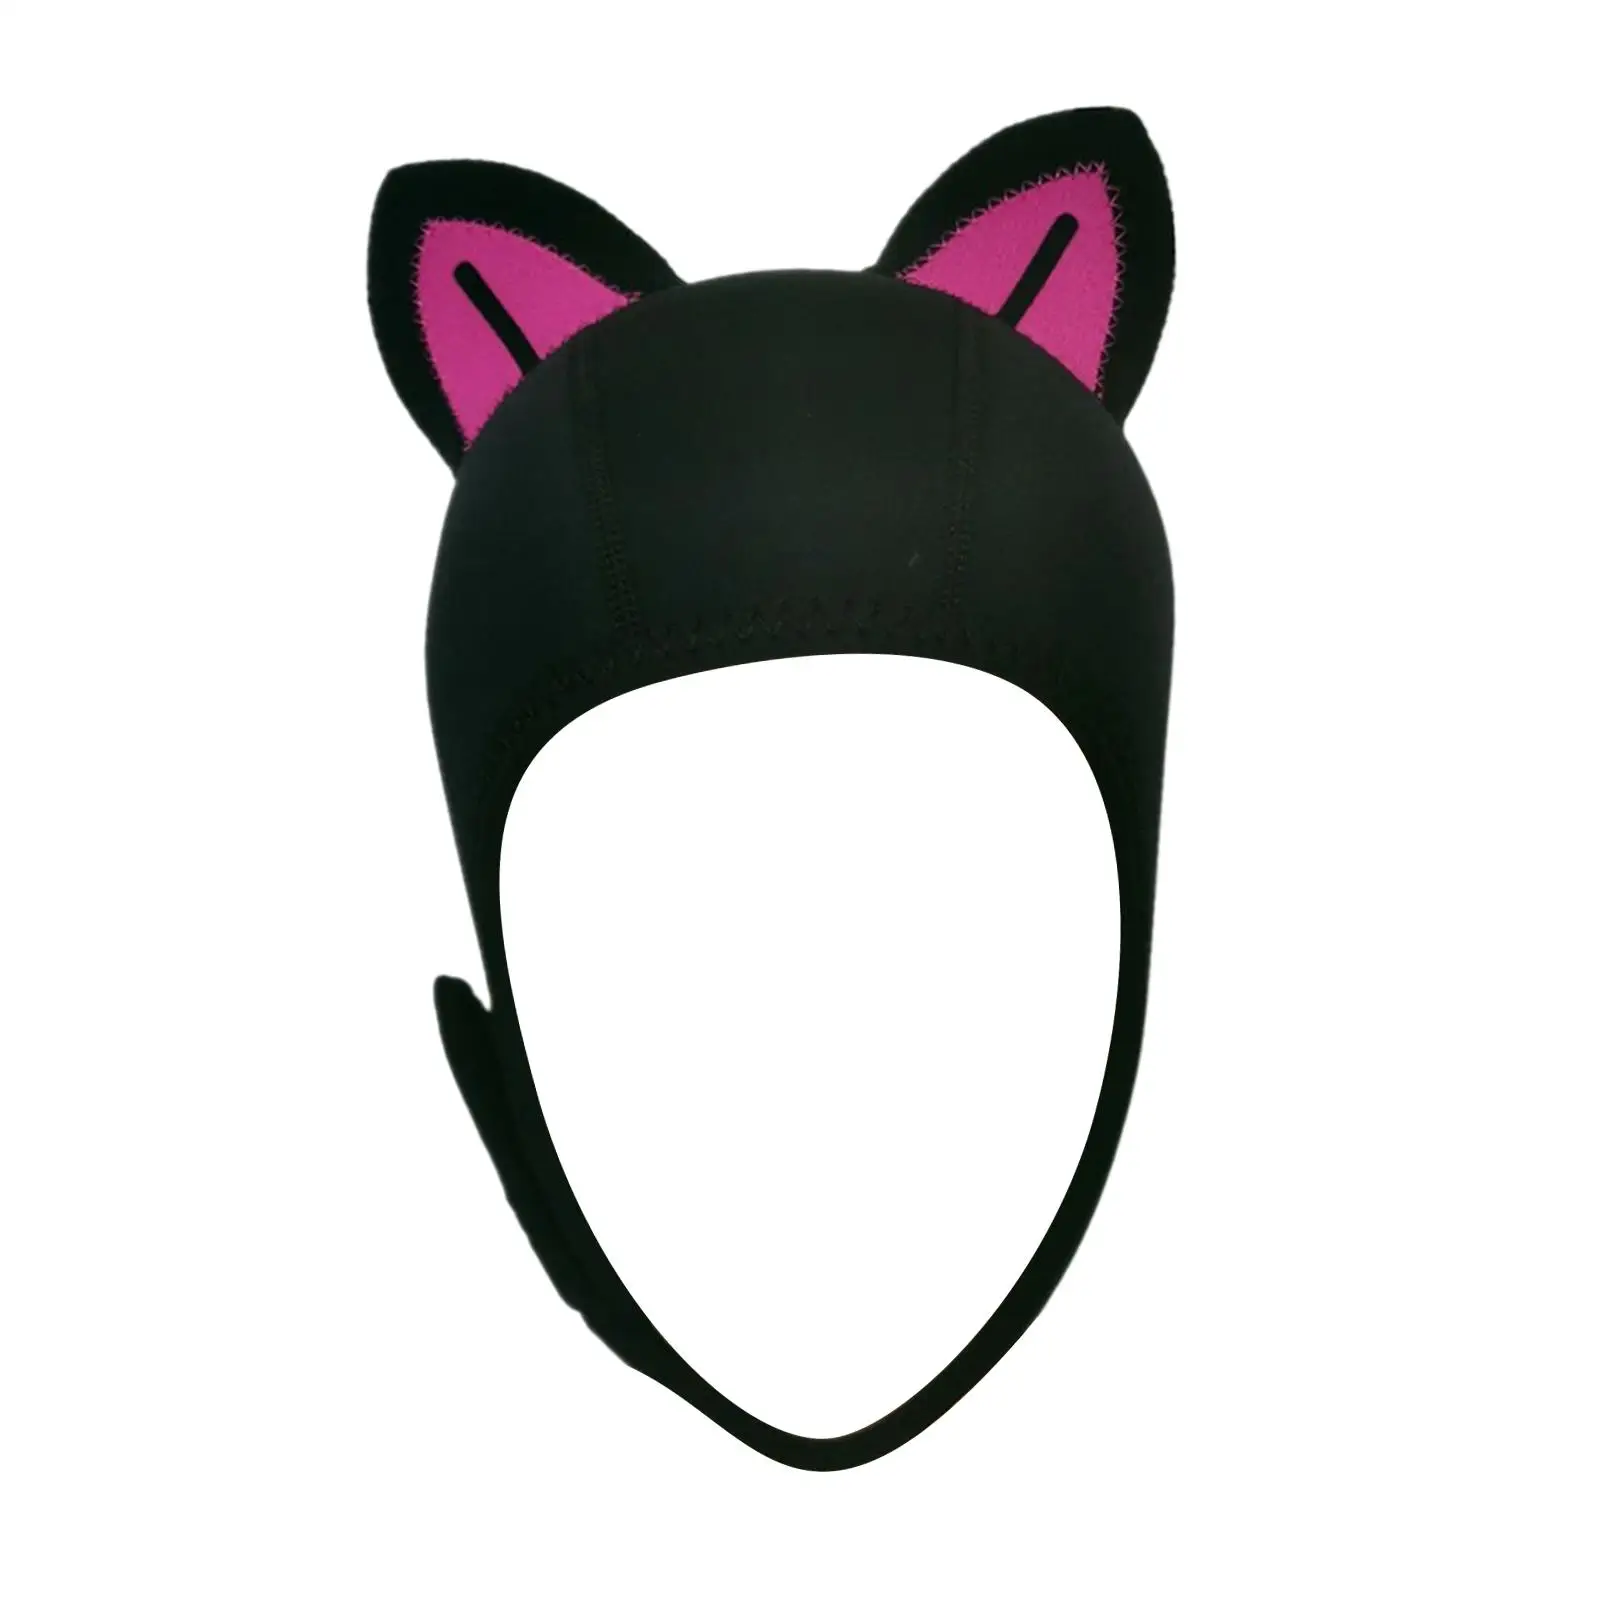 Cat Ears Wetsuit Hood Hat for Women Kids with Air Vent Accessories Convenient to Wear and Take Off